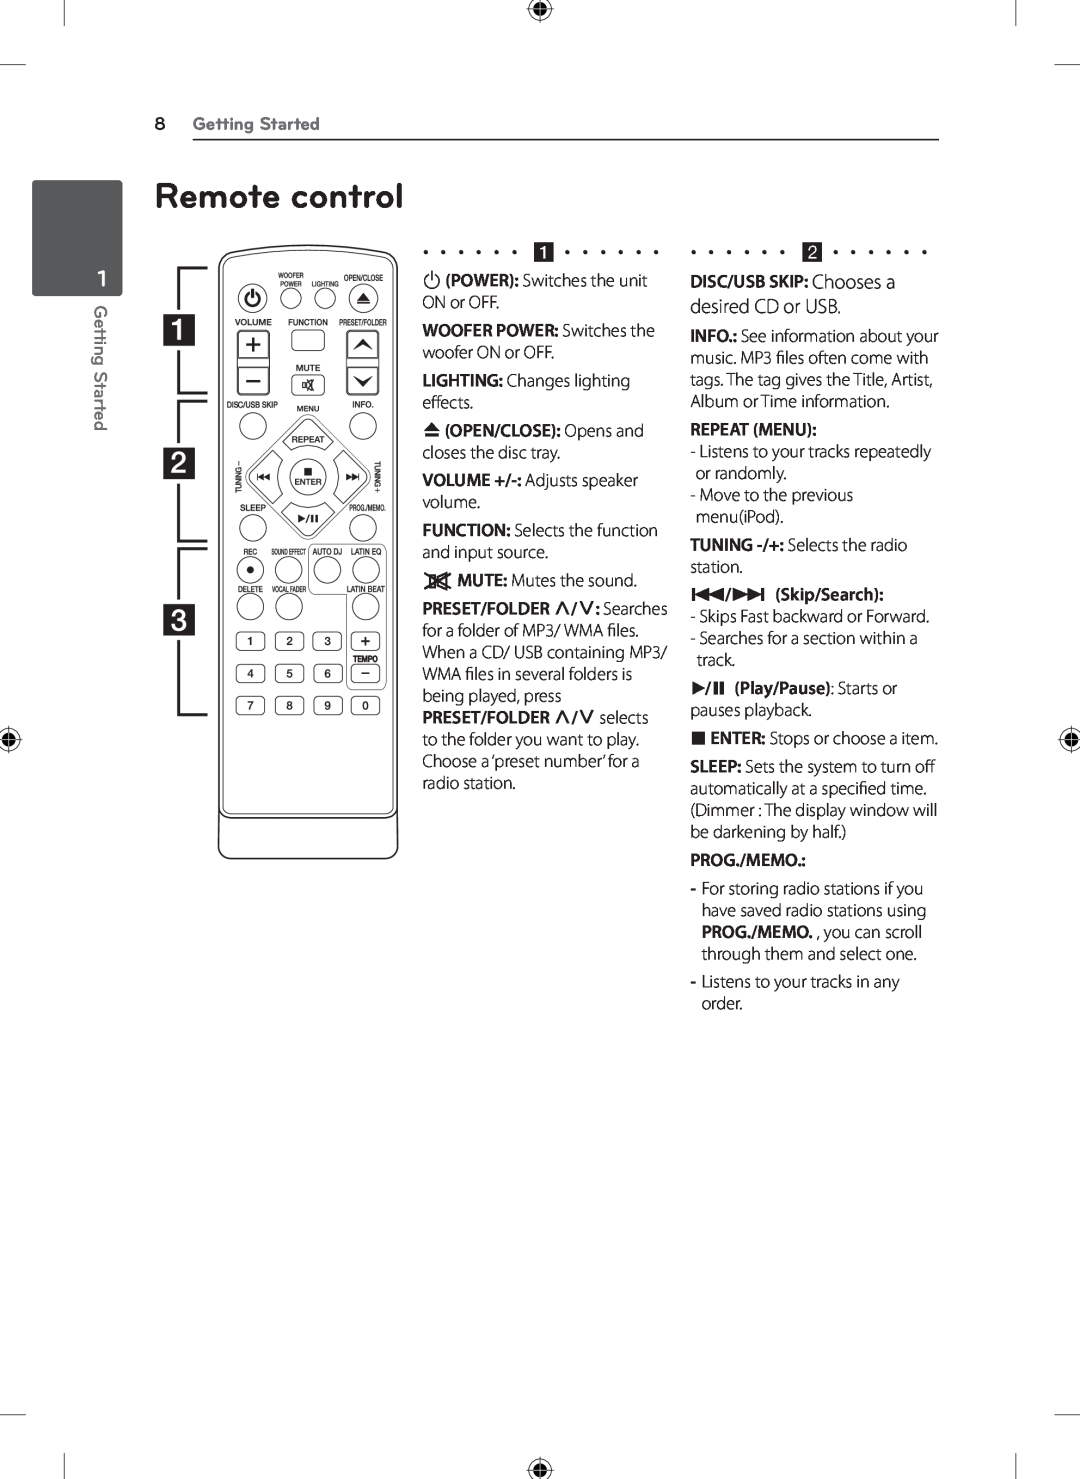 LG Electronics KSM1506 Remote control, 8Getting Started, WOOFER POWER Switches the woofer ON or OFF, Repeat Menu 